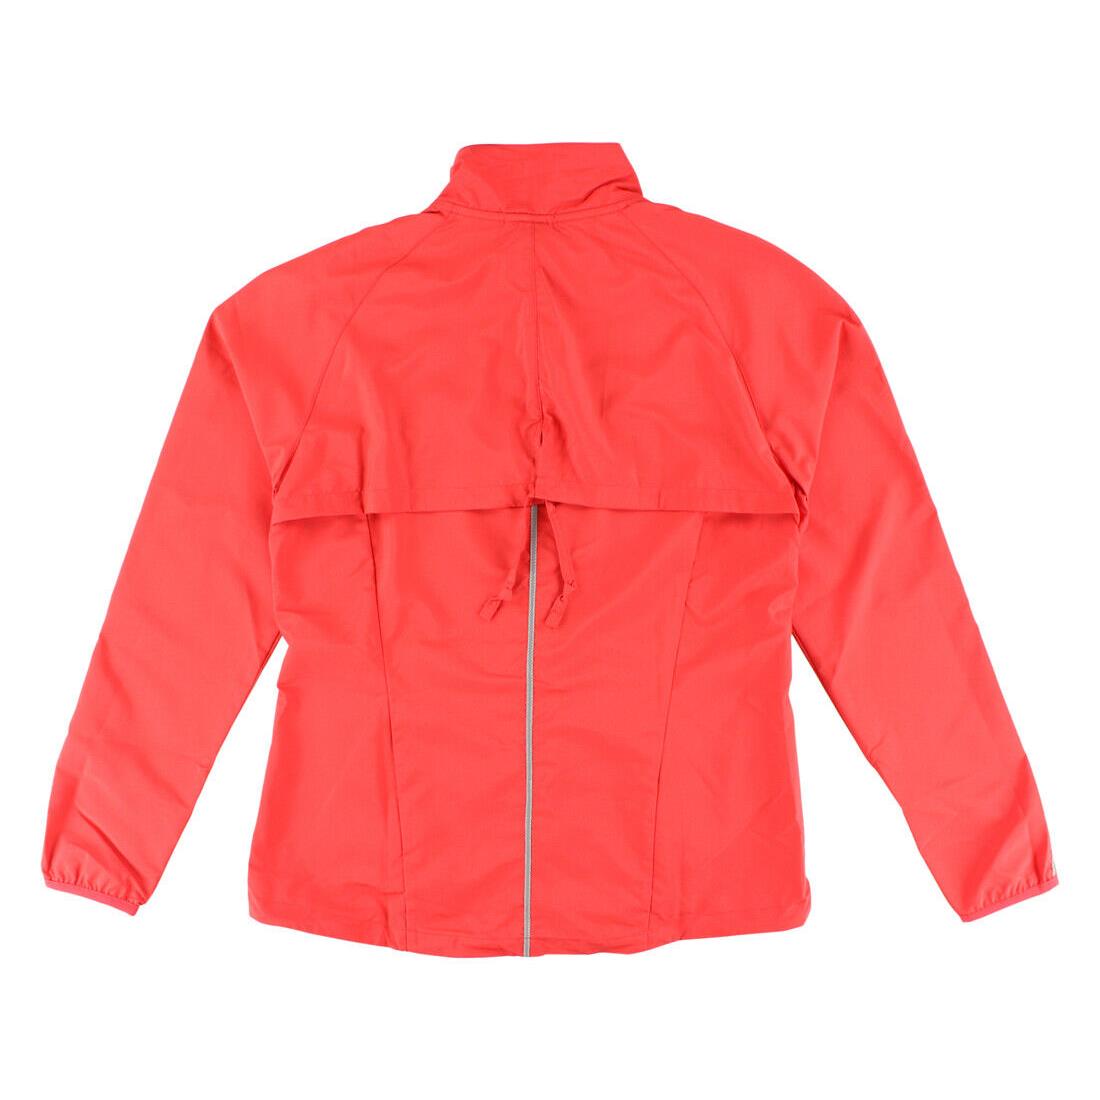 Nike Classic Full Zip Running Womens Jackets Size XS Color: Red